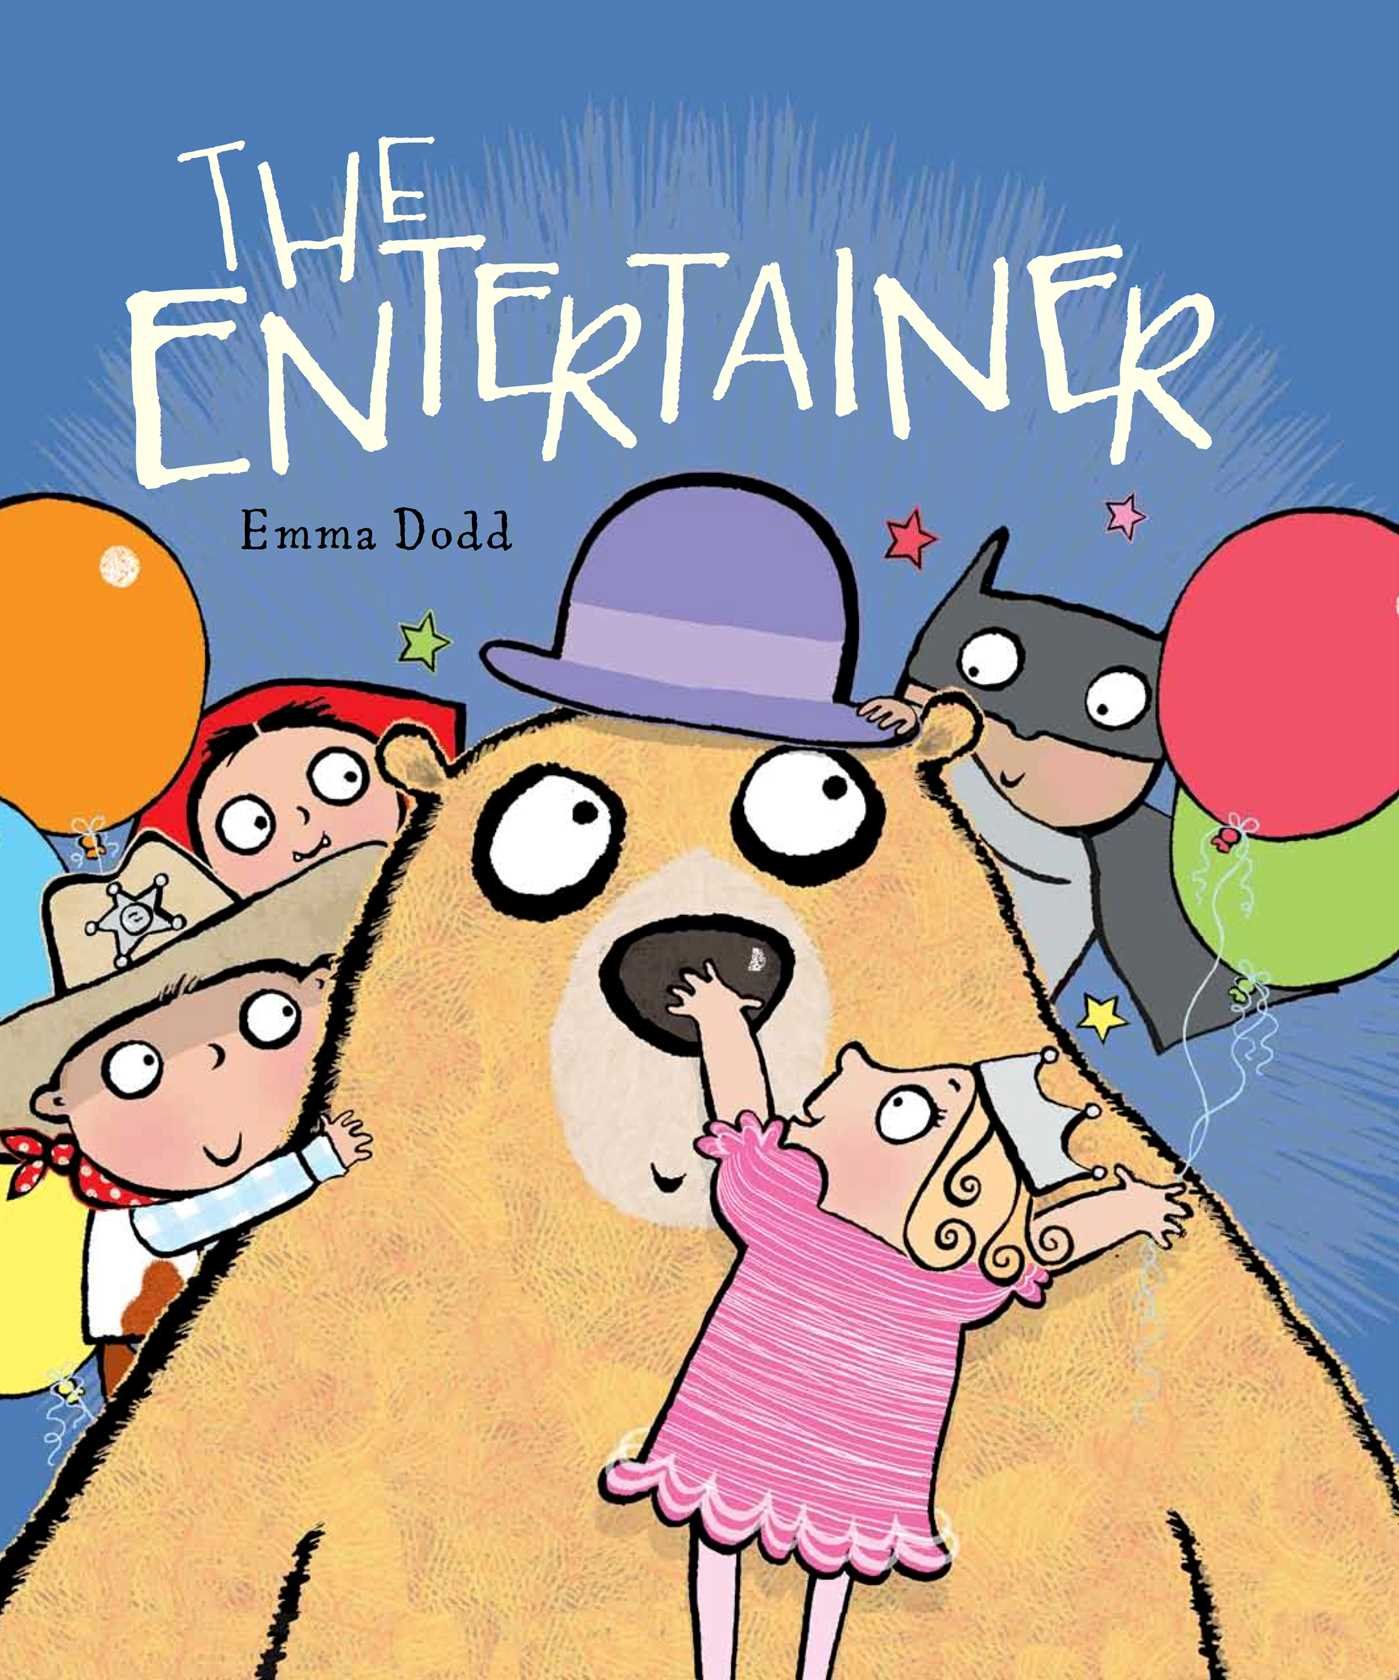 Picture Book Study: The Entertainer by Emma Dodd